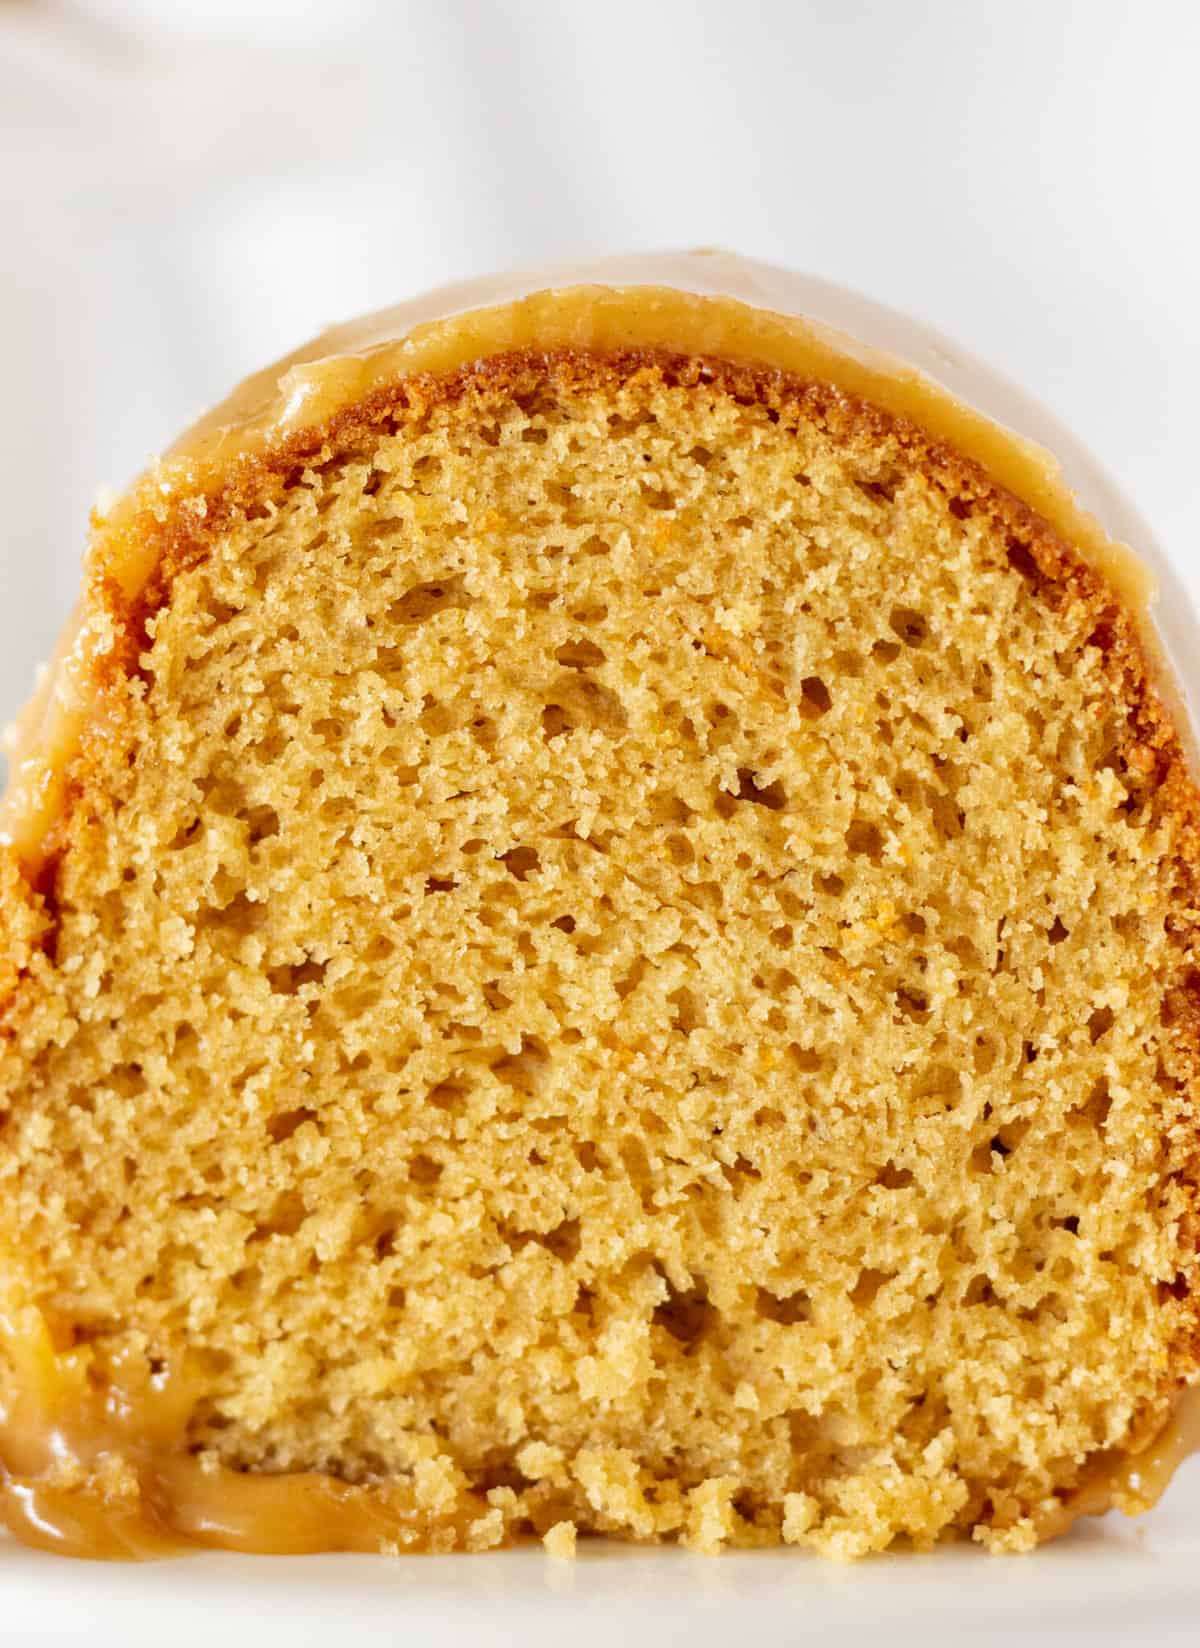 Peanut Butter Texas Sheet Cake Bundt Cake Recipe Made with a Cake Mix by top US dessert blogger, Practically Homemade